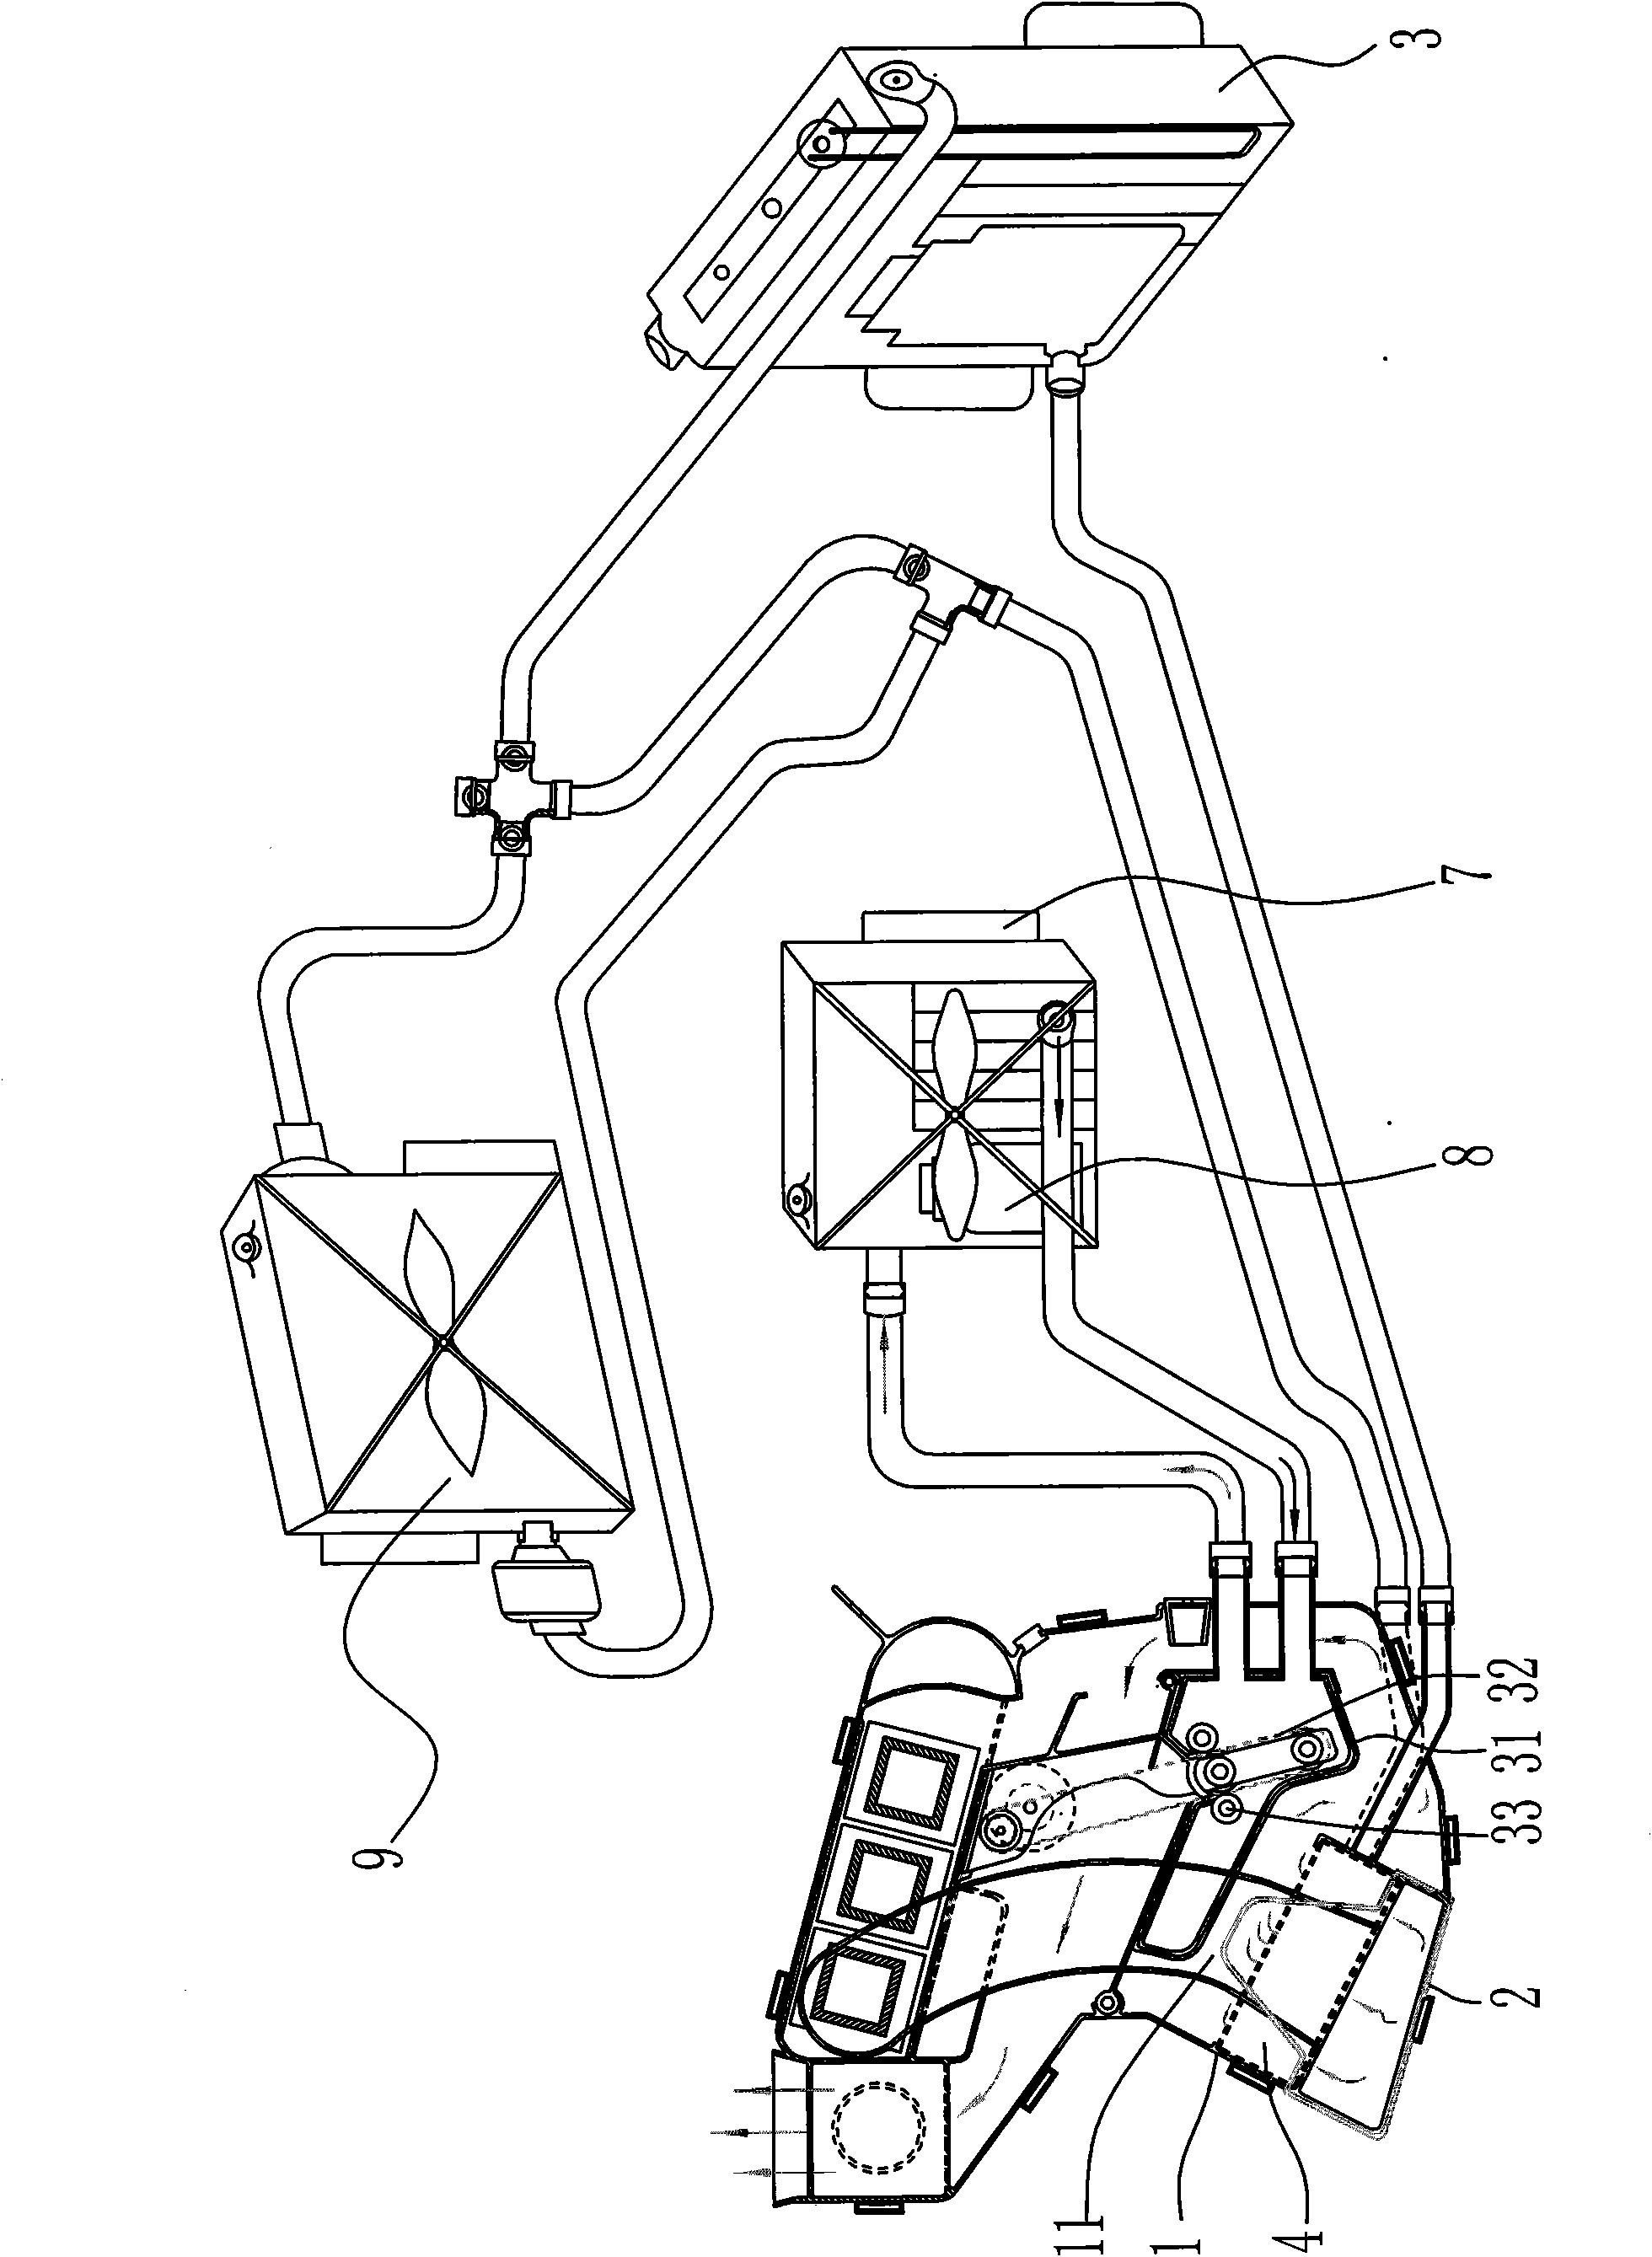 Heating and cooling system used in carriage of electric automobile